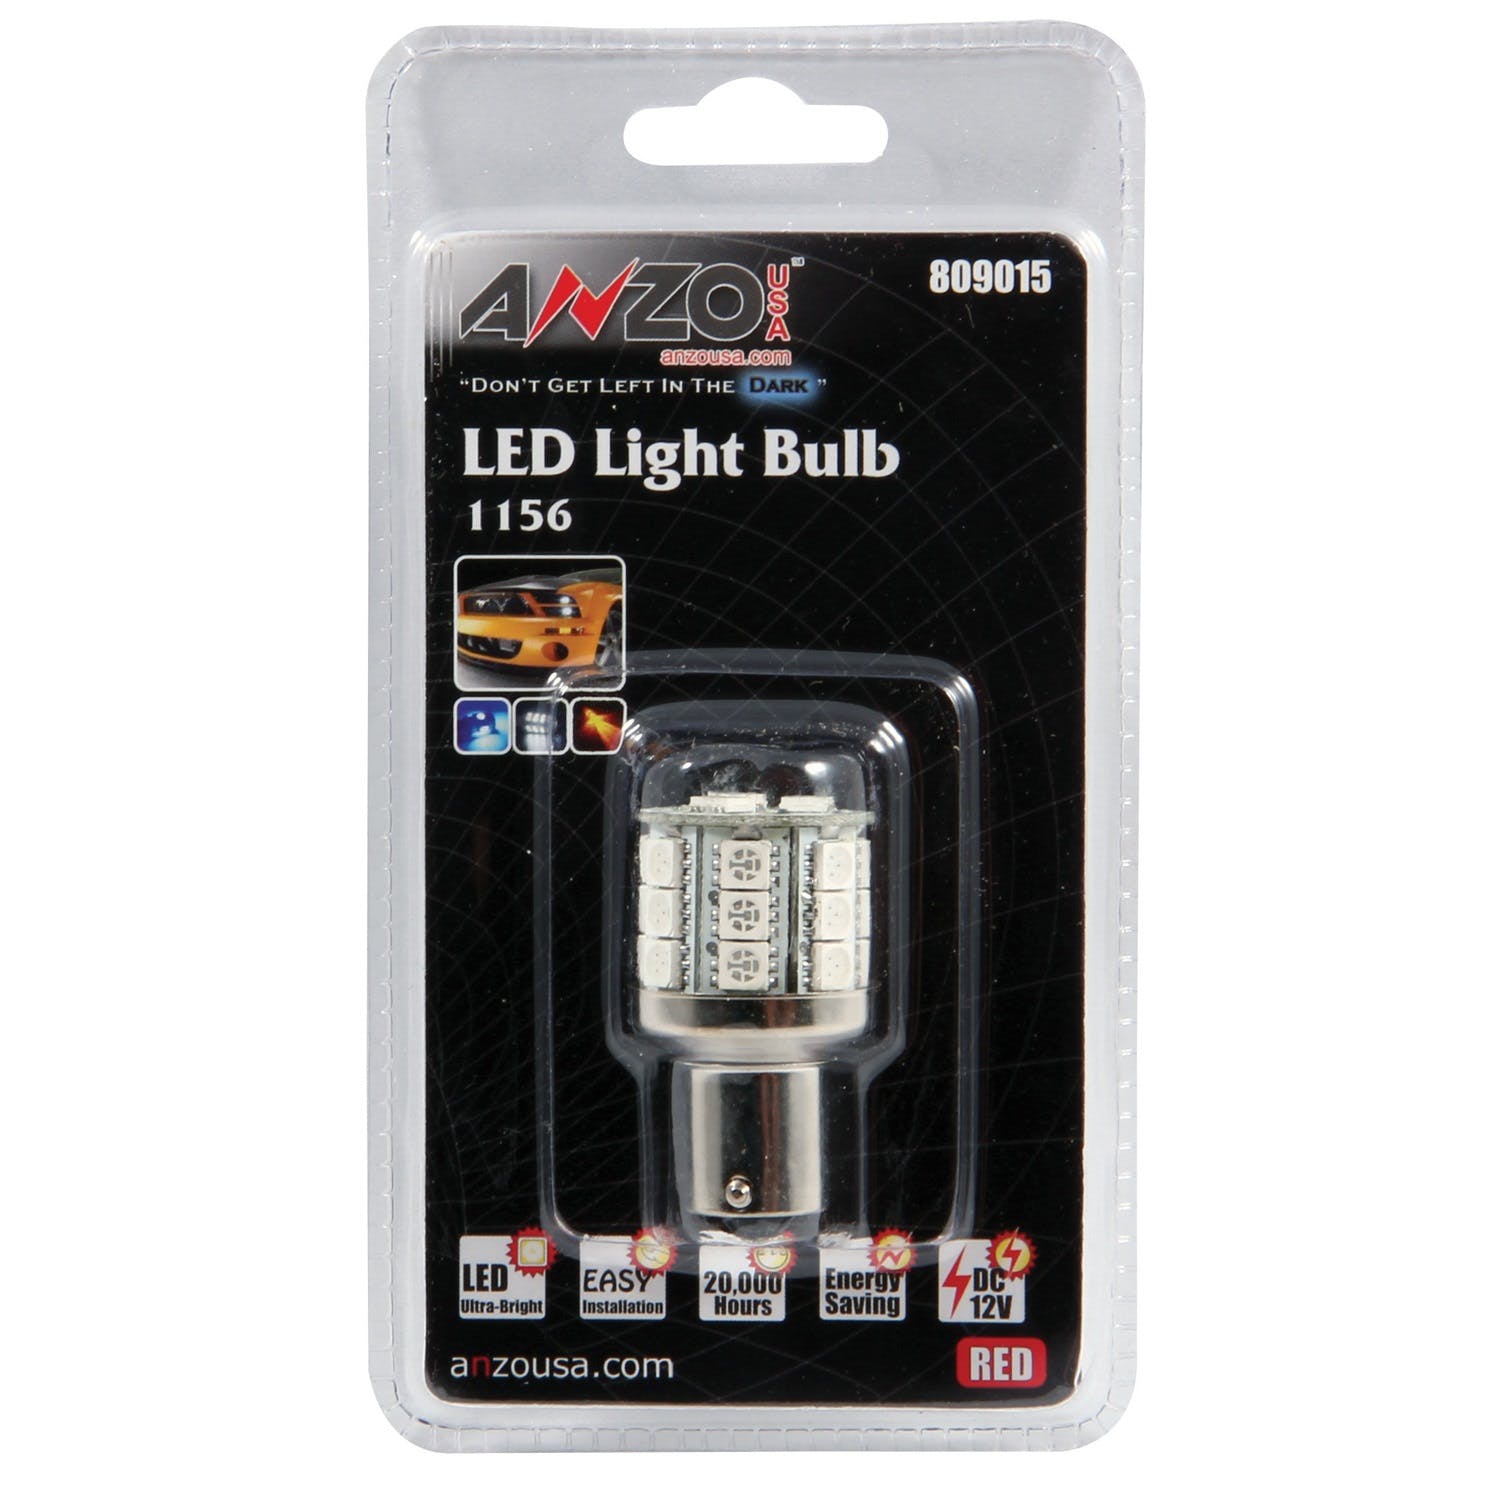 AnzoUSA 809015 LED 1156 Red - 23 LED's 1 3/4" Tall